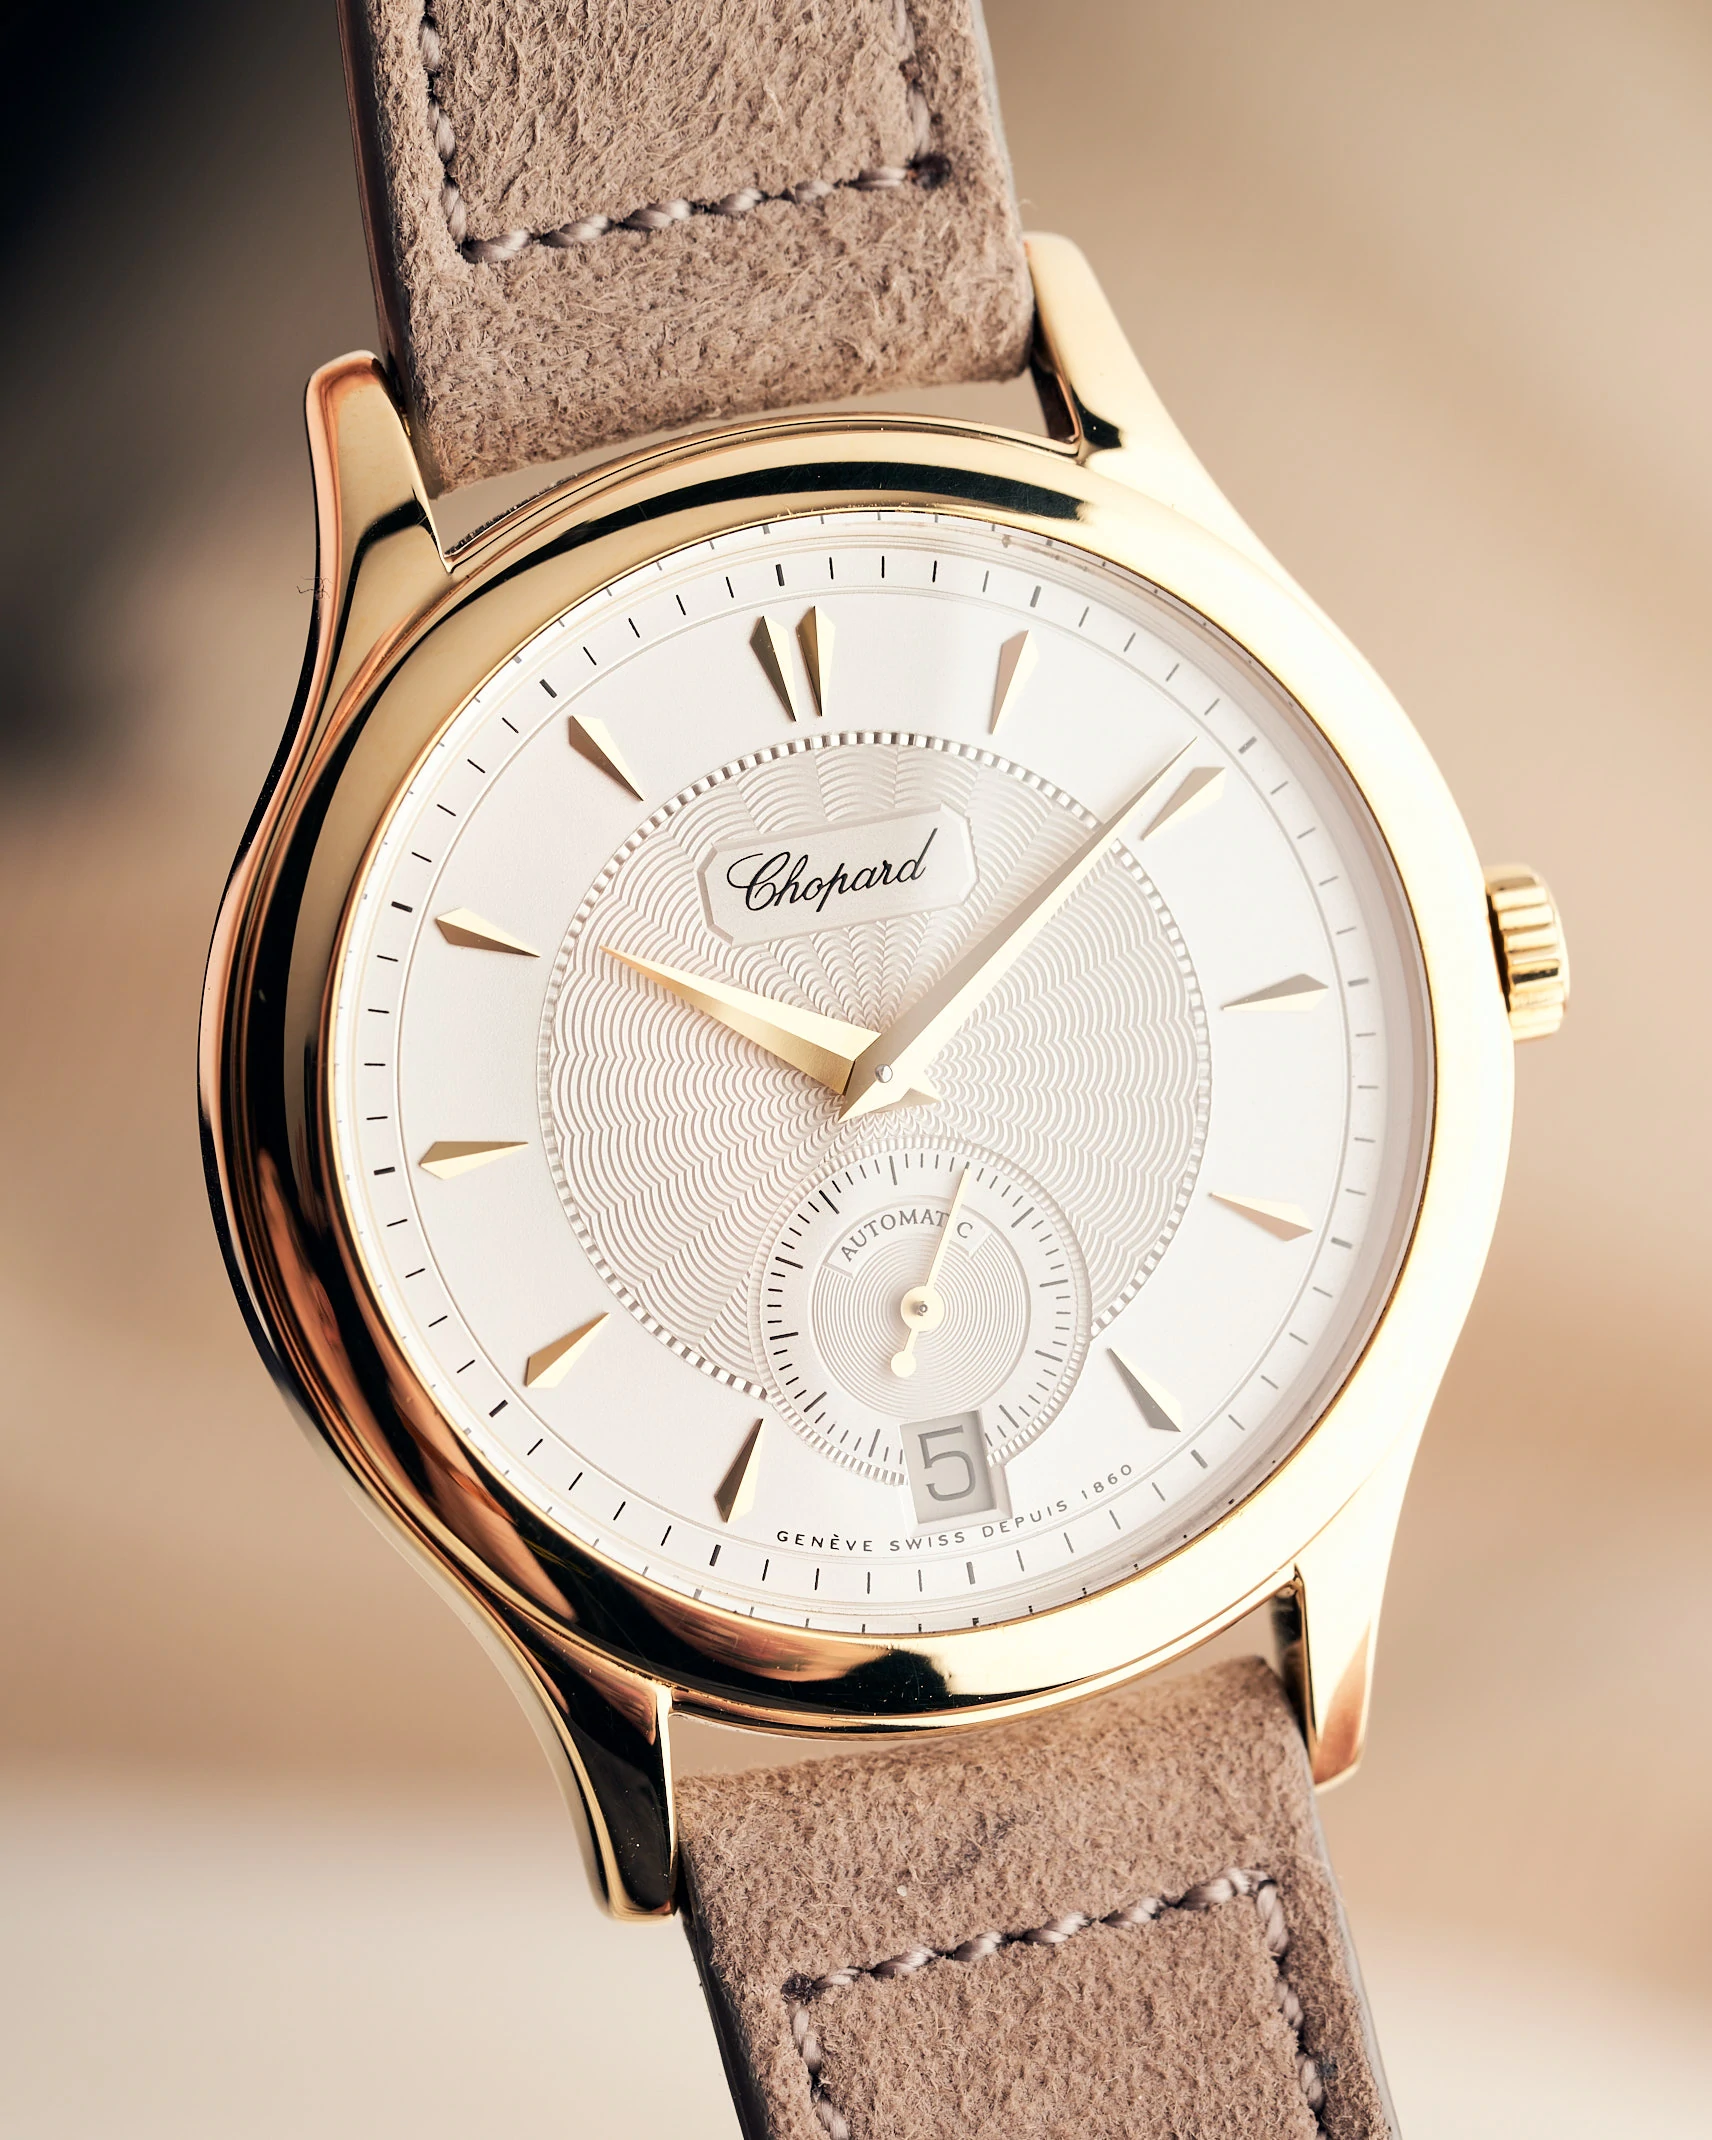 Chopard, History & Sales Information